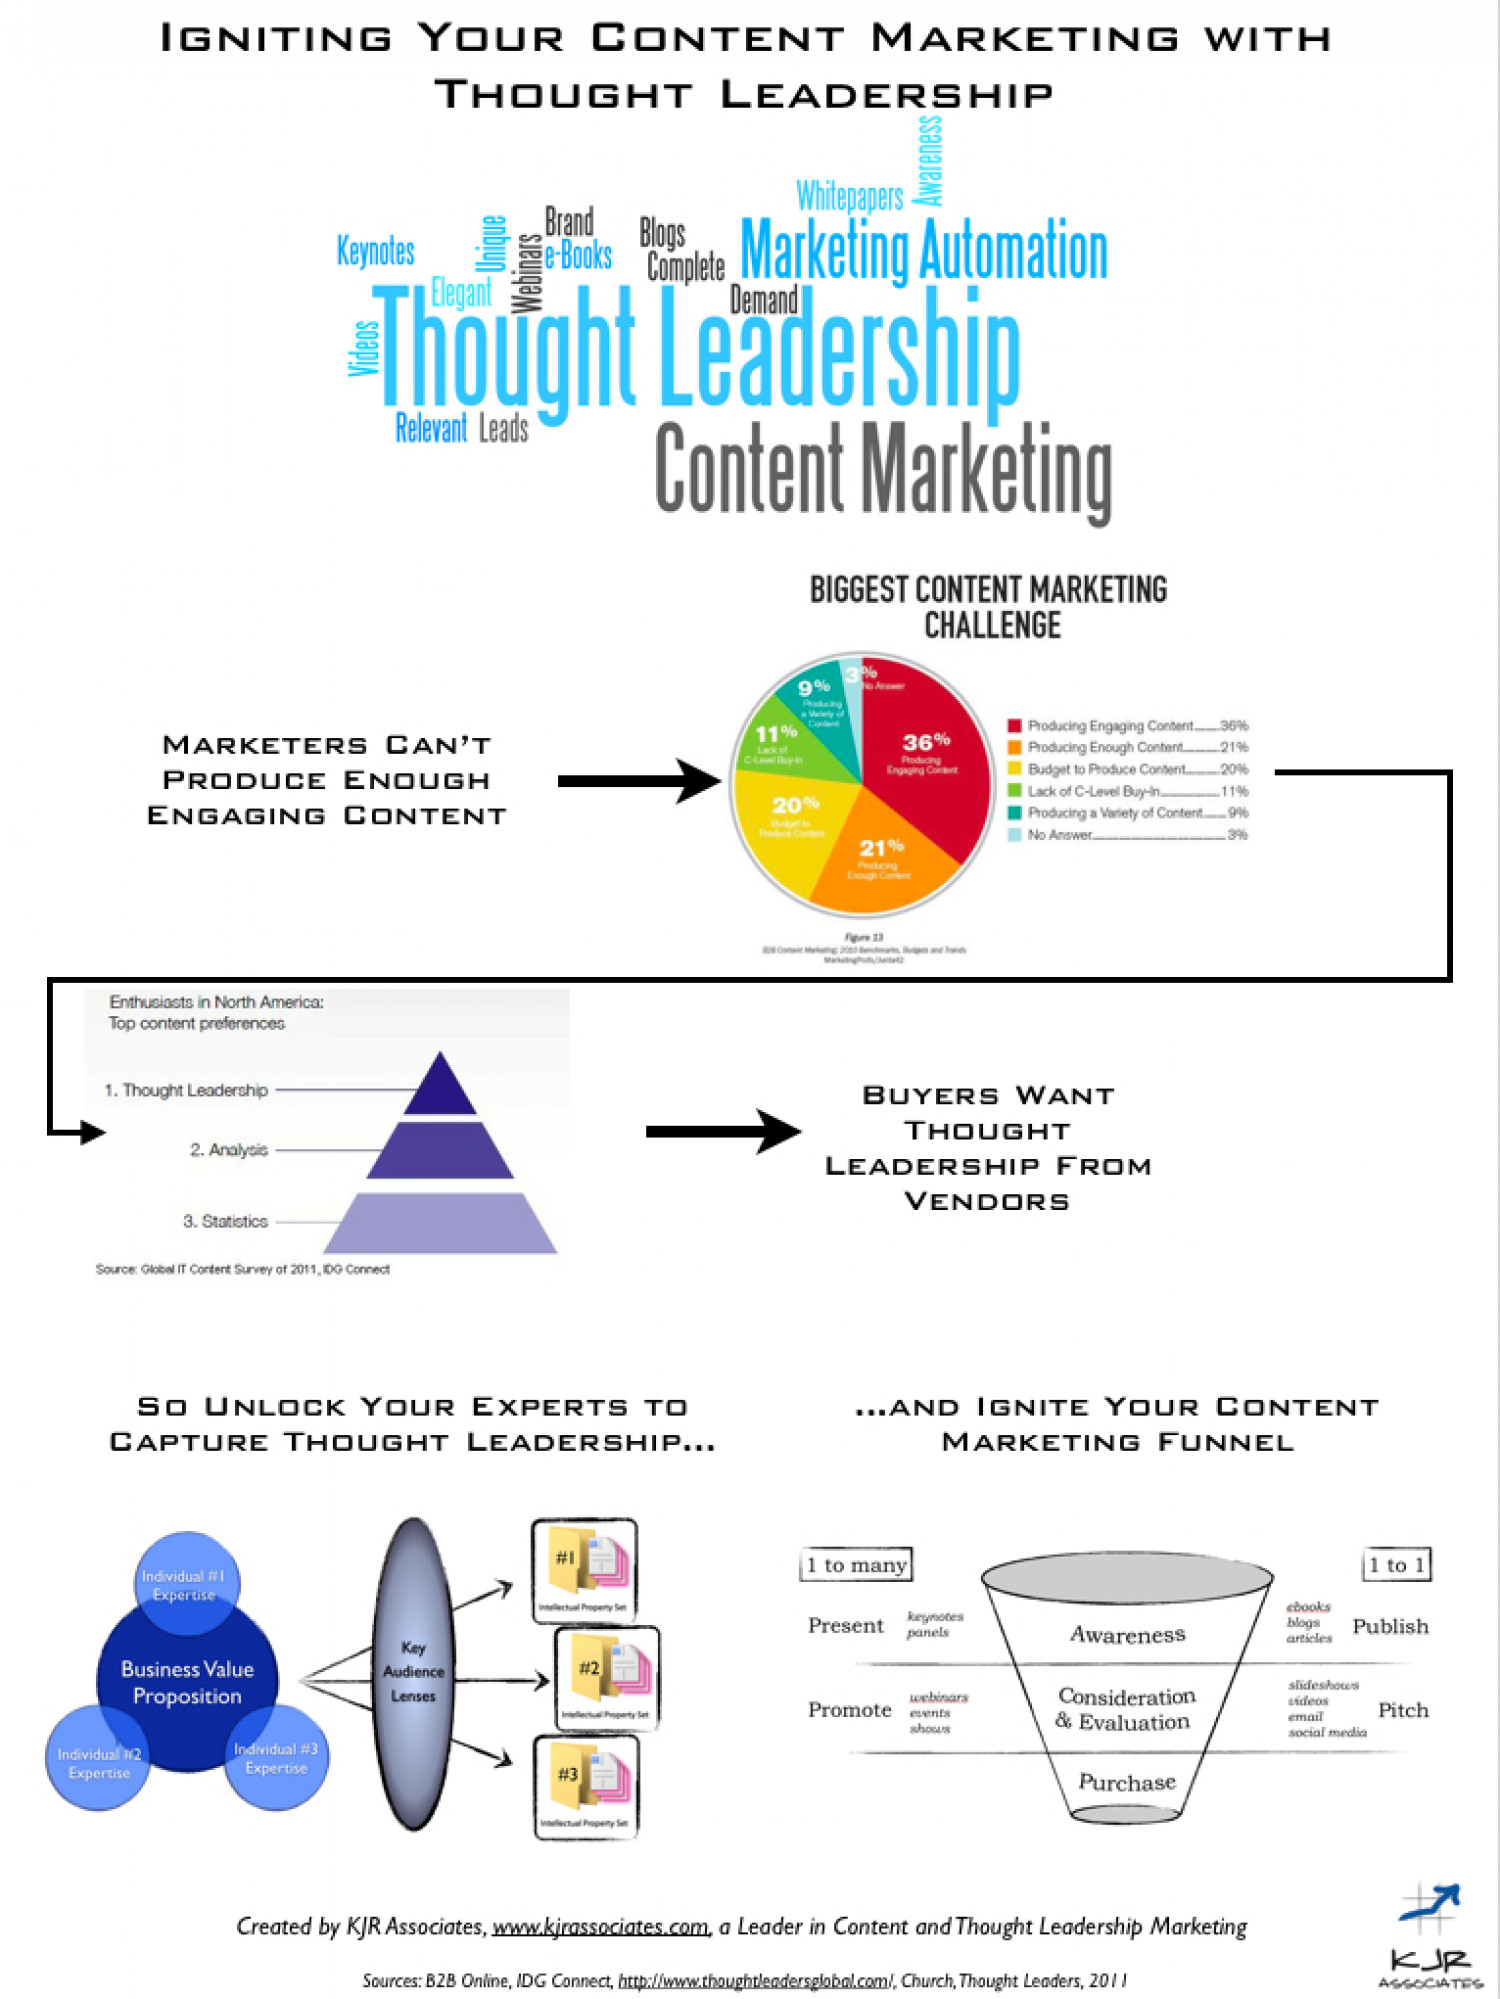 Igniting Content Marketing with Thought Leadership Infographic